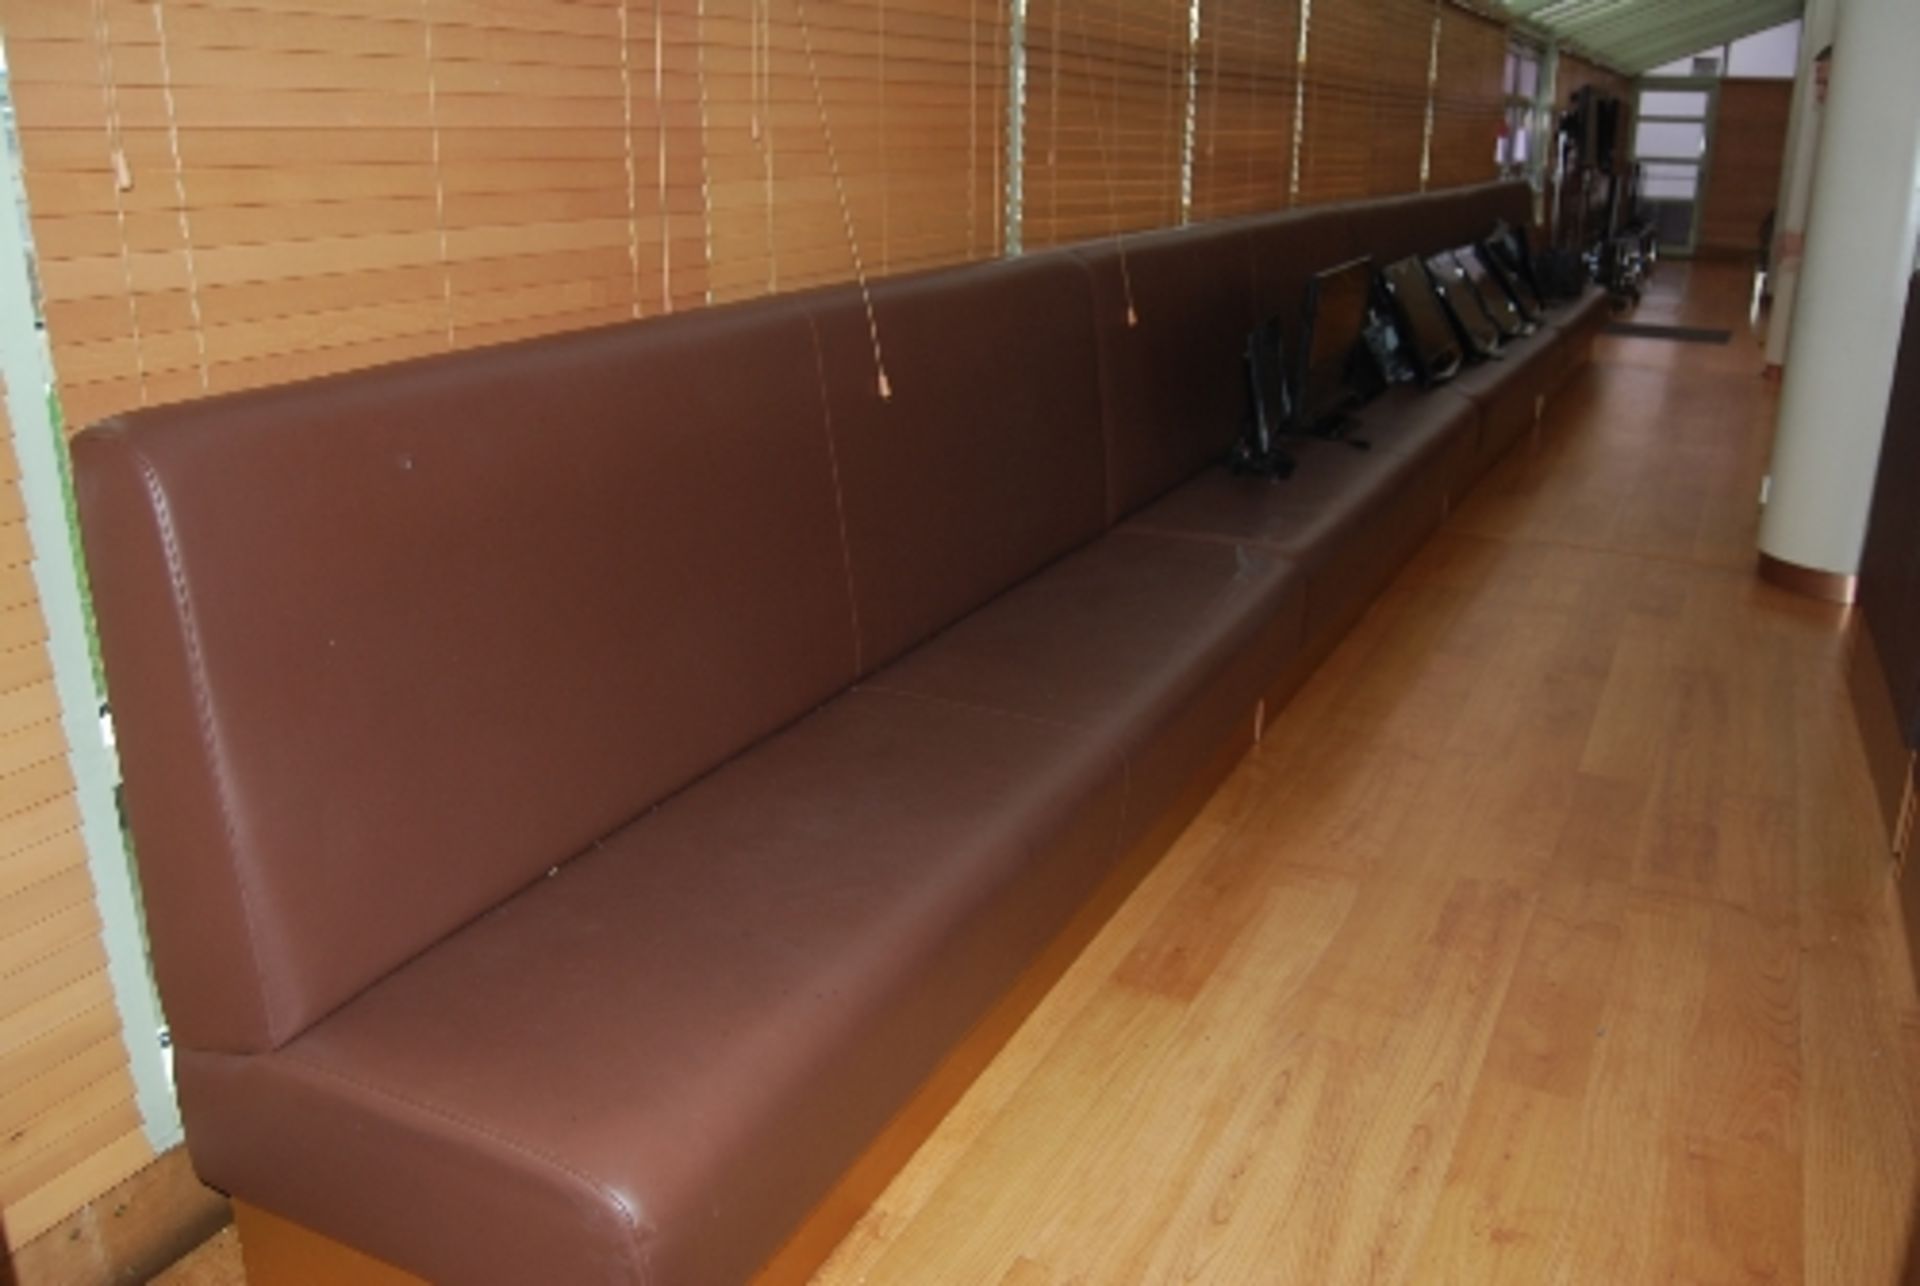 4 - Section brown leatherette upholstered bench seating